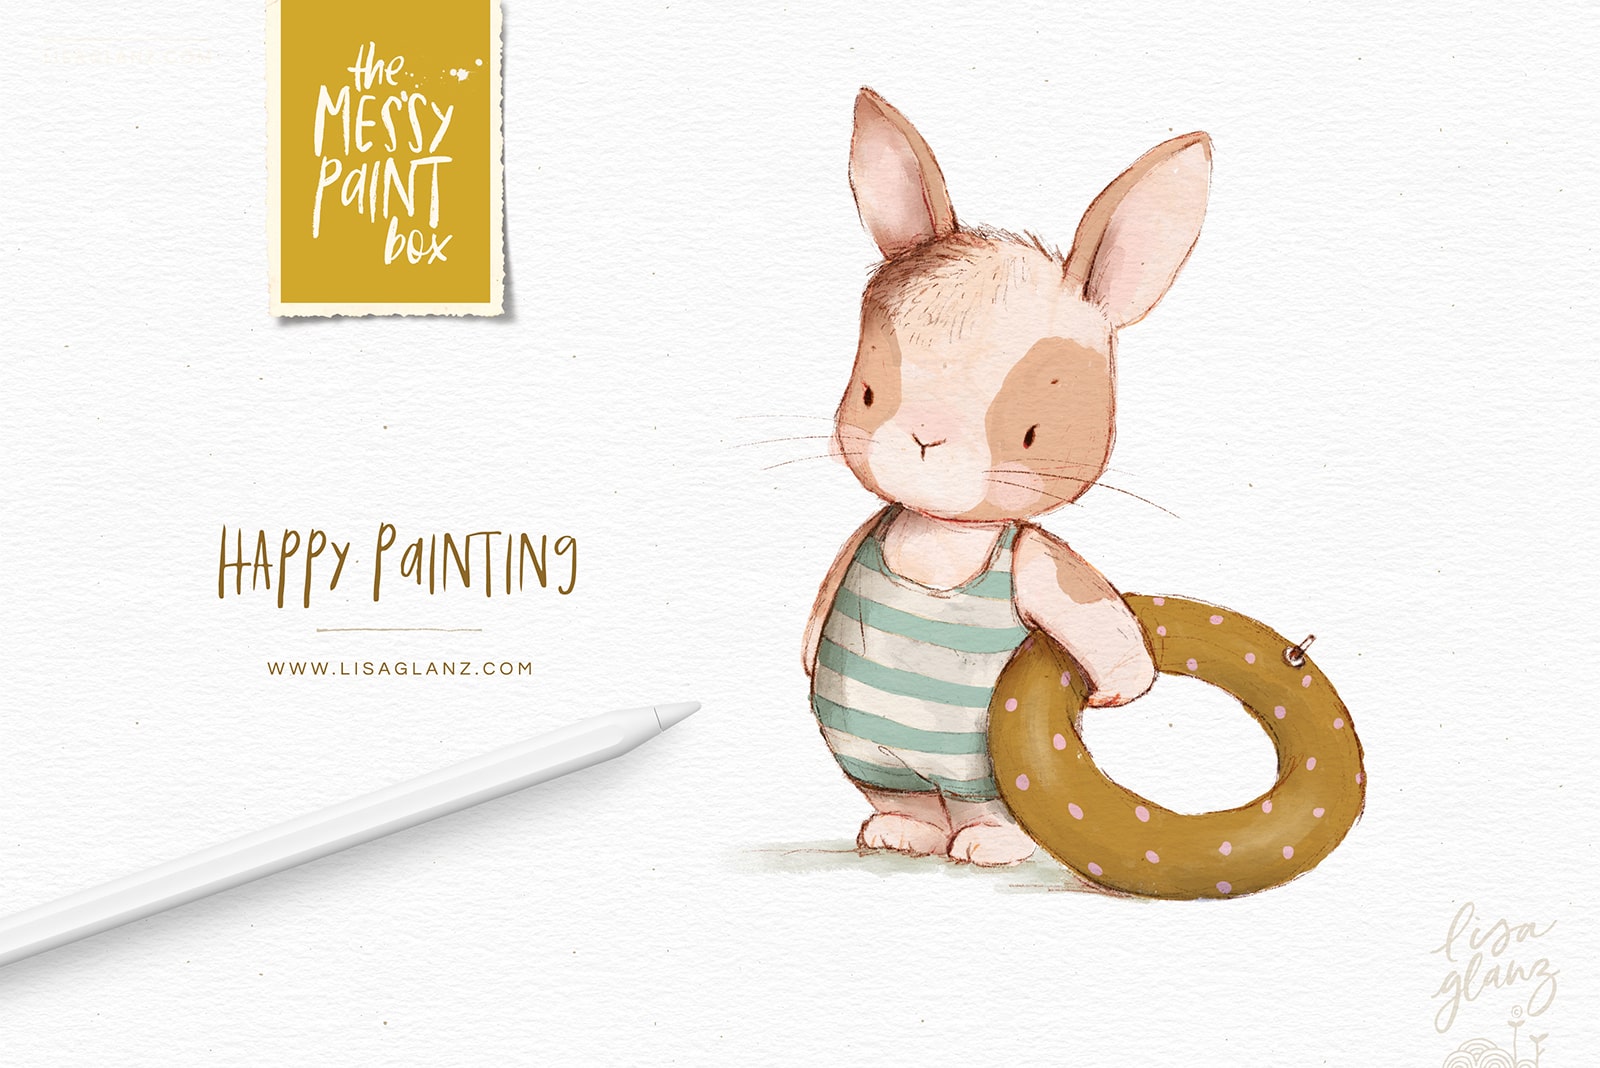 Messy paint box by Lisa Glanz cute bunny